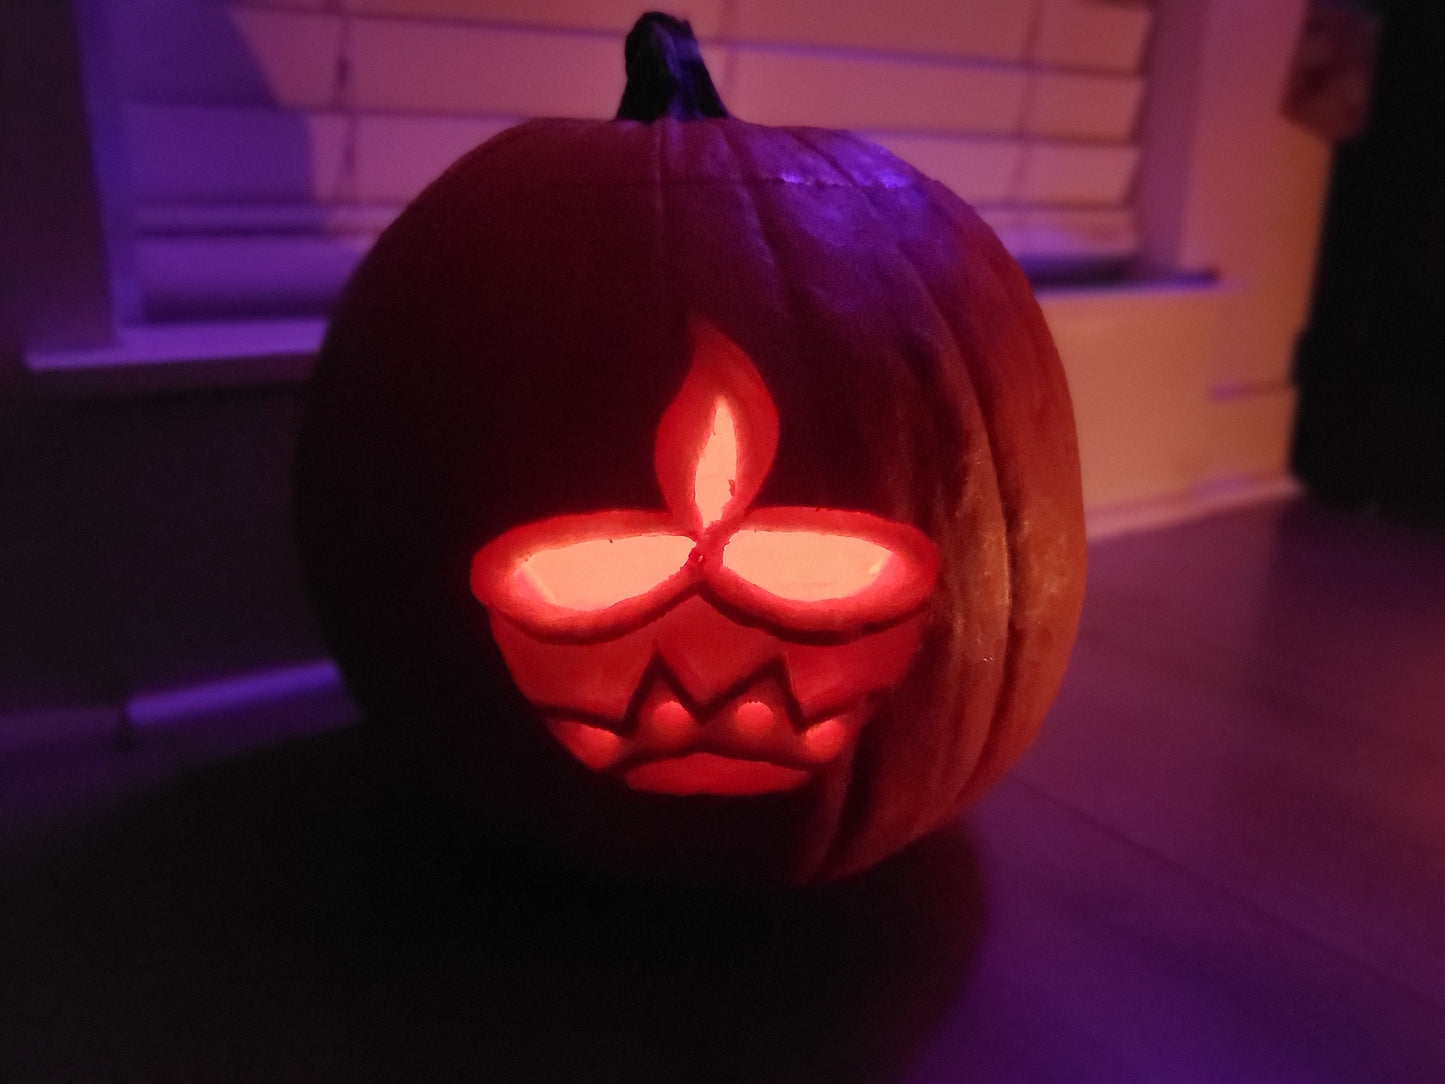 Diya carved out on pumpkin using diya coloring page as a stencil